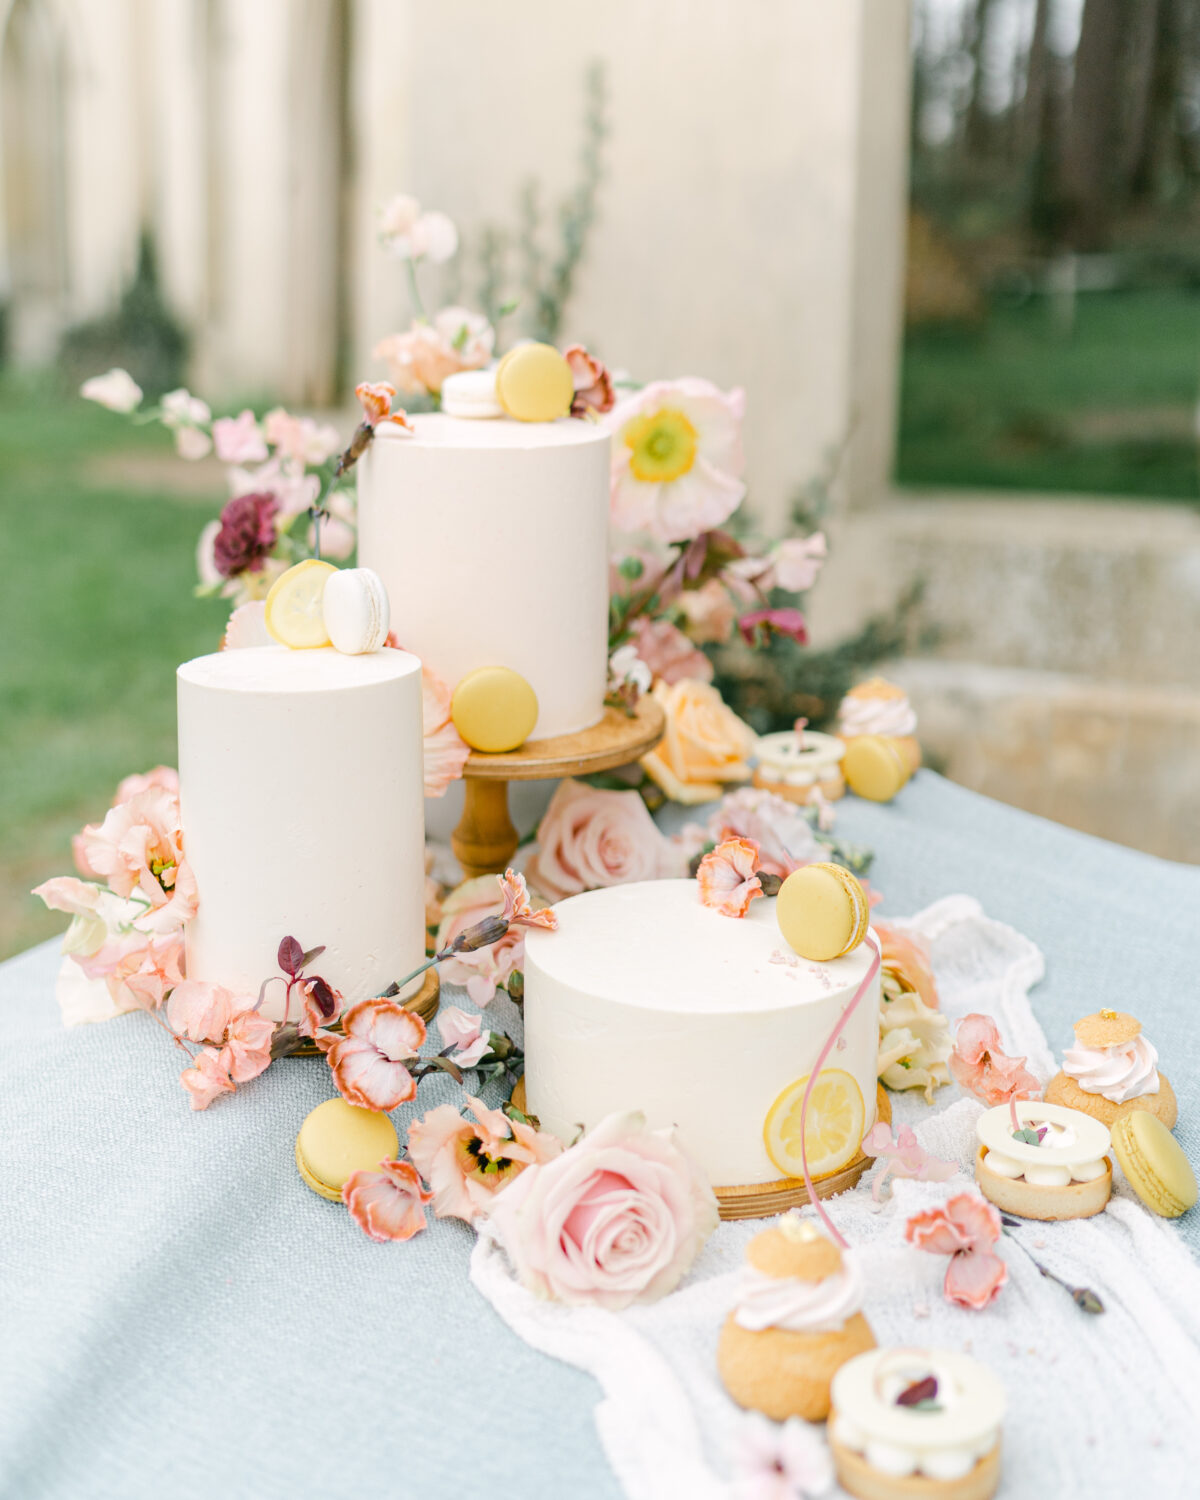 Floral wedding cake trio at Painshill Park. Photography by Sara Cooper Photography